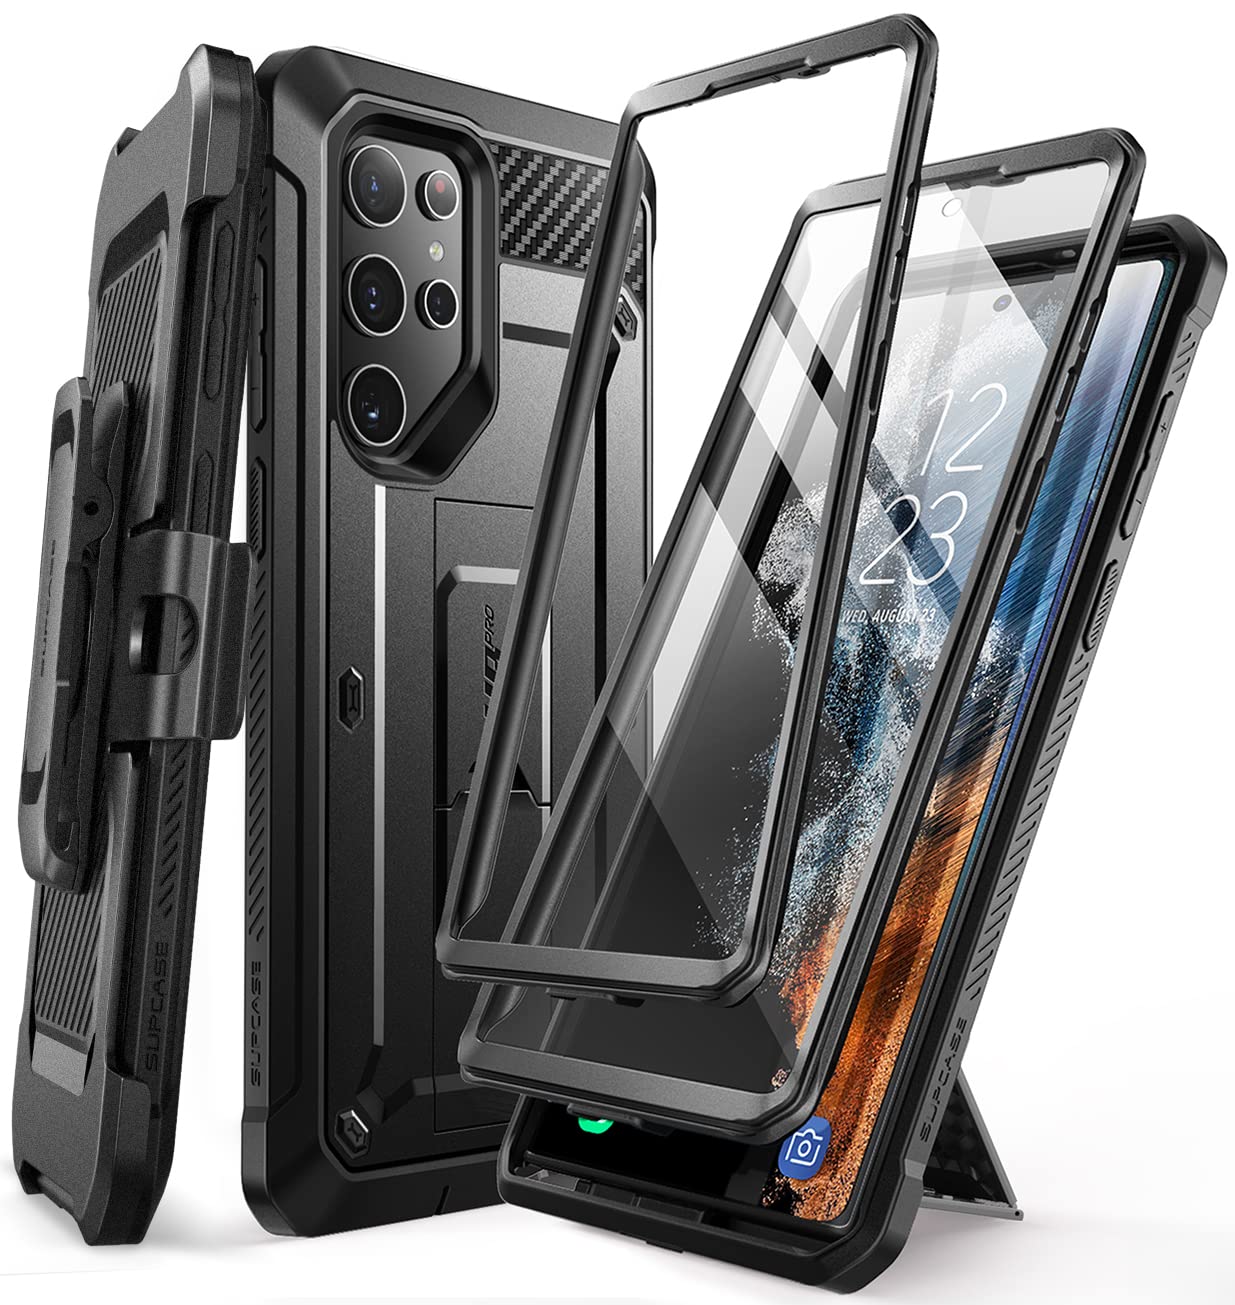 SUPCASE Unicorn Beetle Pro Case for Samsung Galaxy S22 Ultra 5G (2022 Release), [Extra Front Frame] Full-Body Dual Layer Rugged Belt-Clip & Kickstand Case with Built-in Screen Protector (Black)